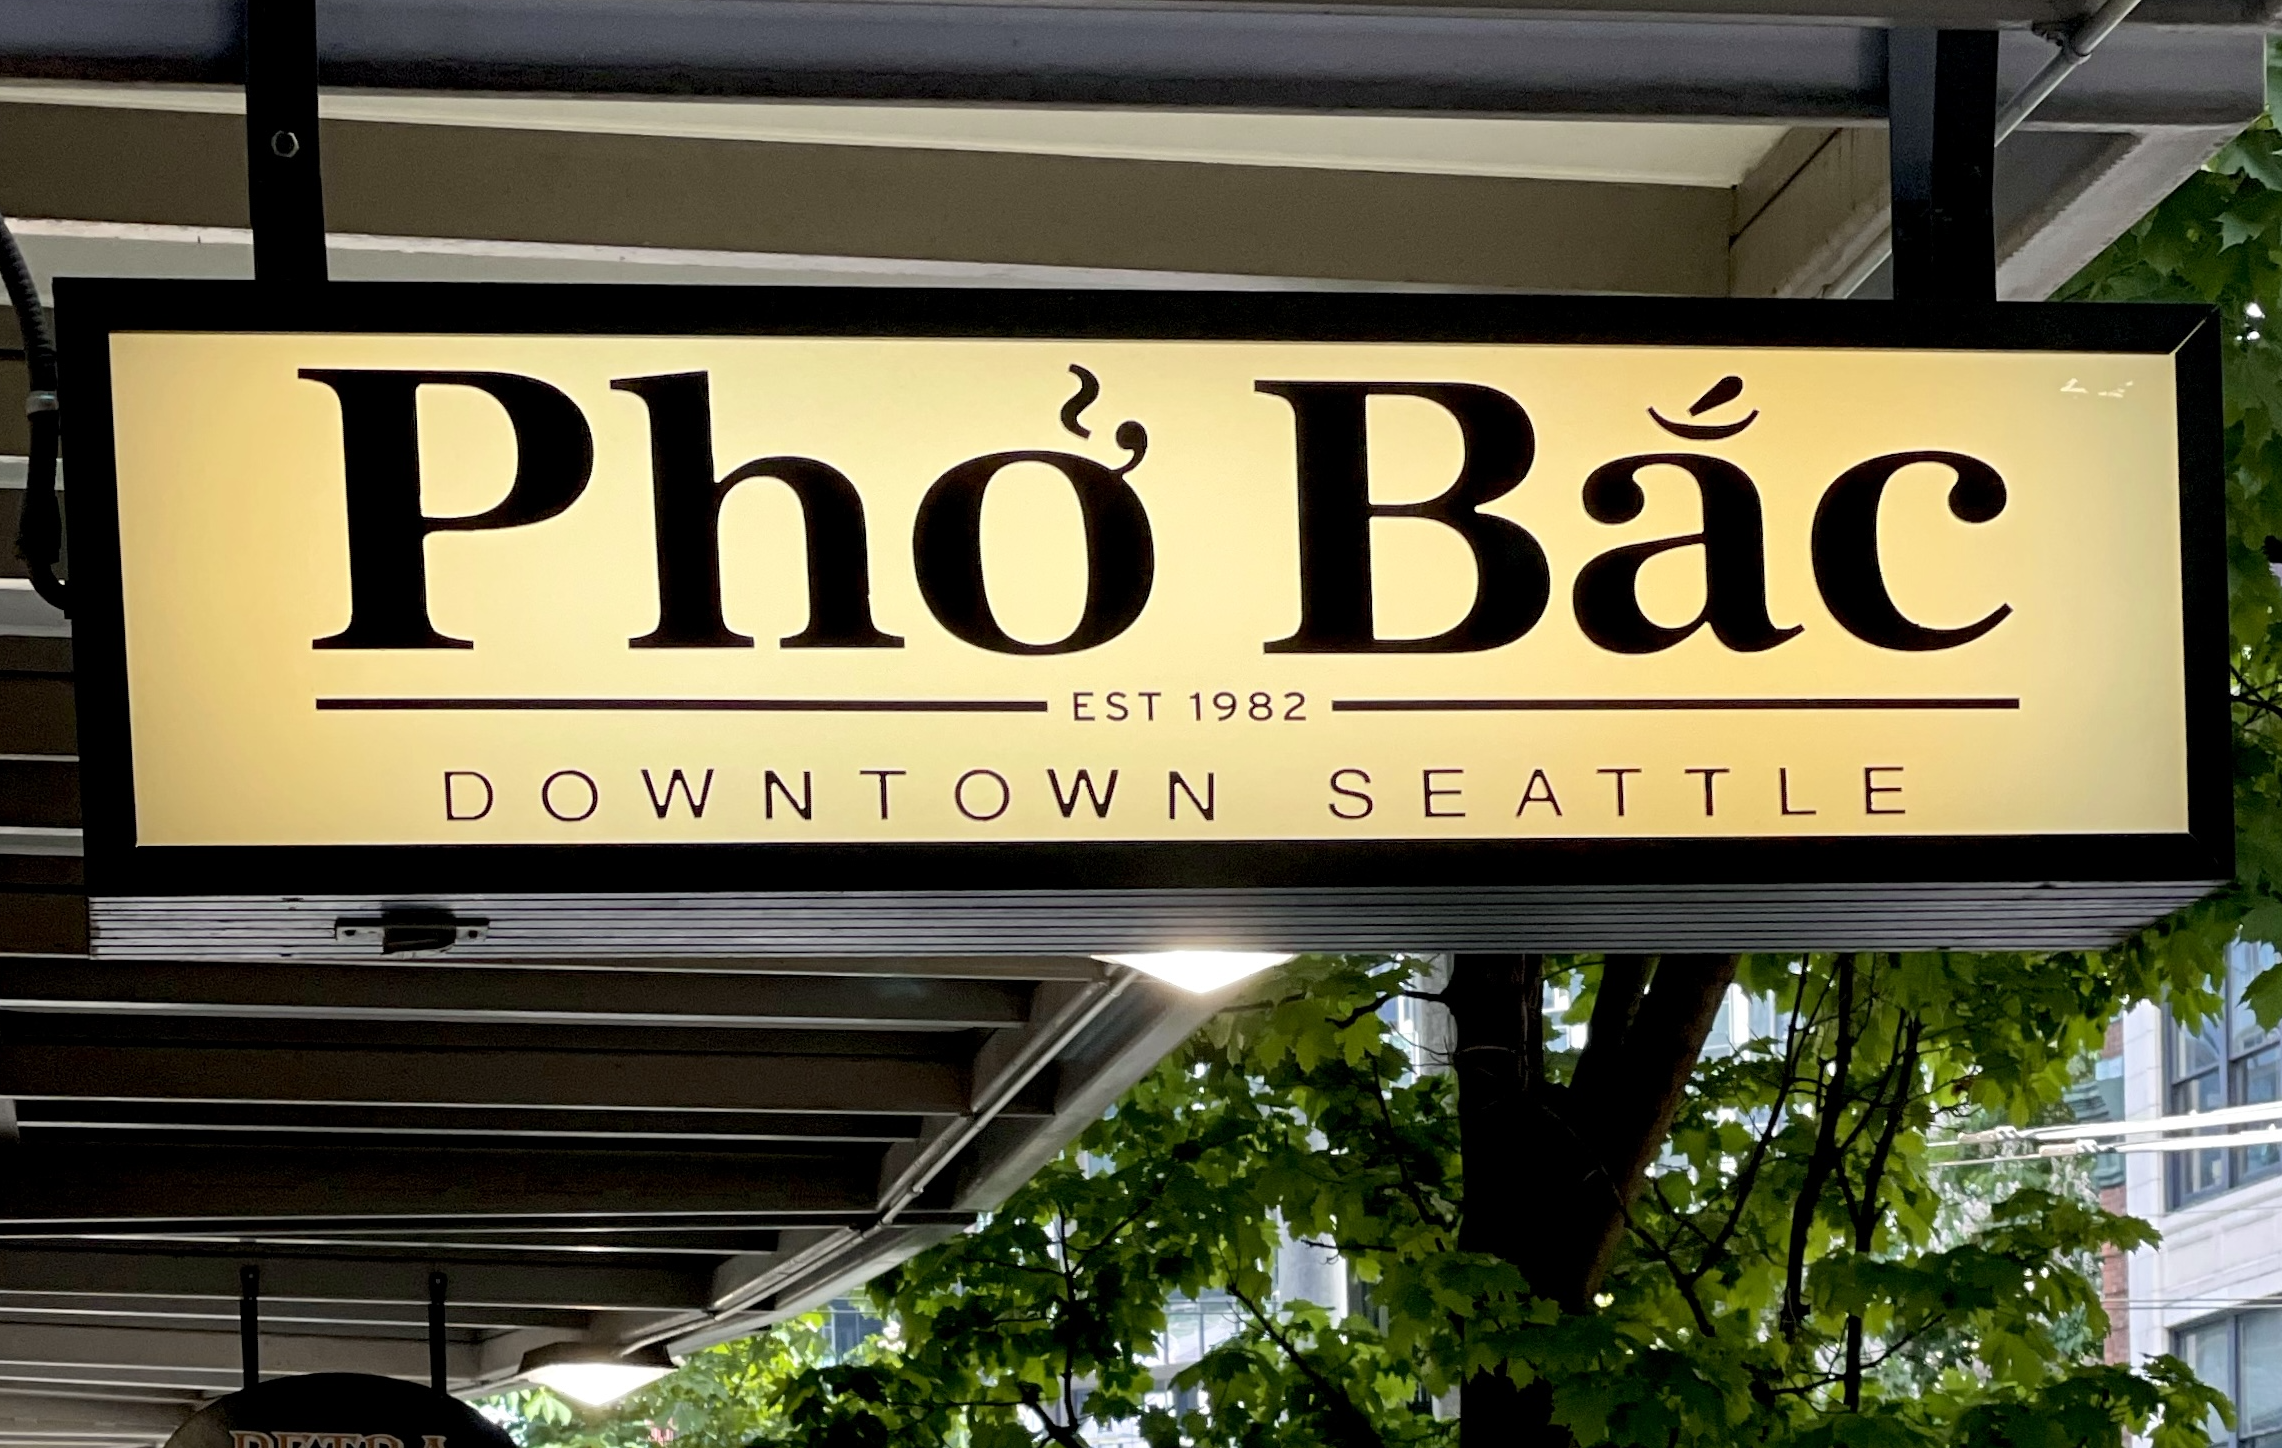 The glowing yellow sign for Pho Bac has the restaurant’s name in bold letters, then below it (smaller) it says EST. 1982, Downtown Seattle.